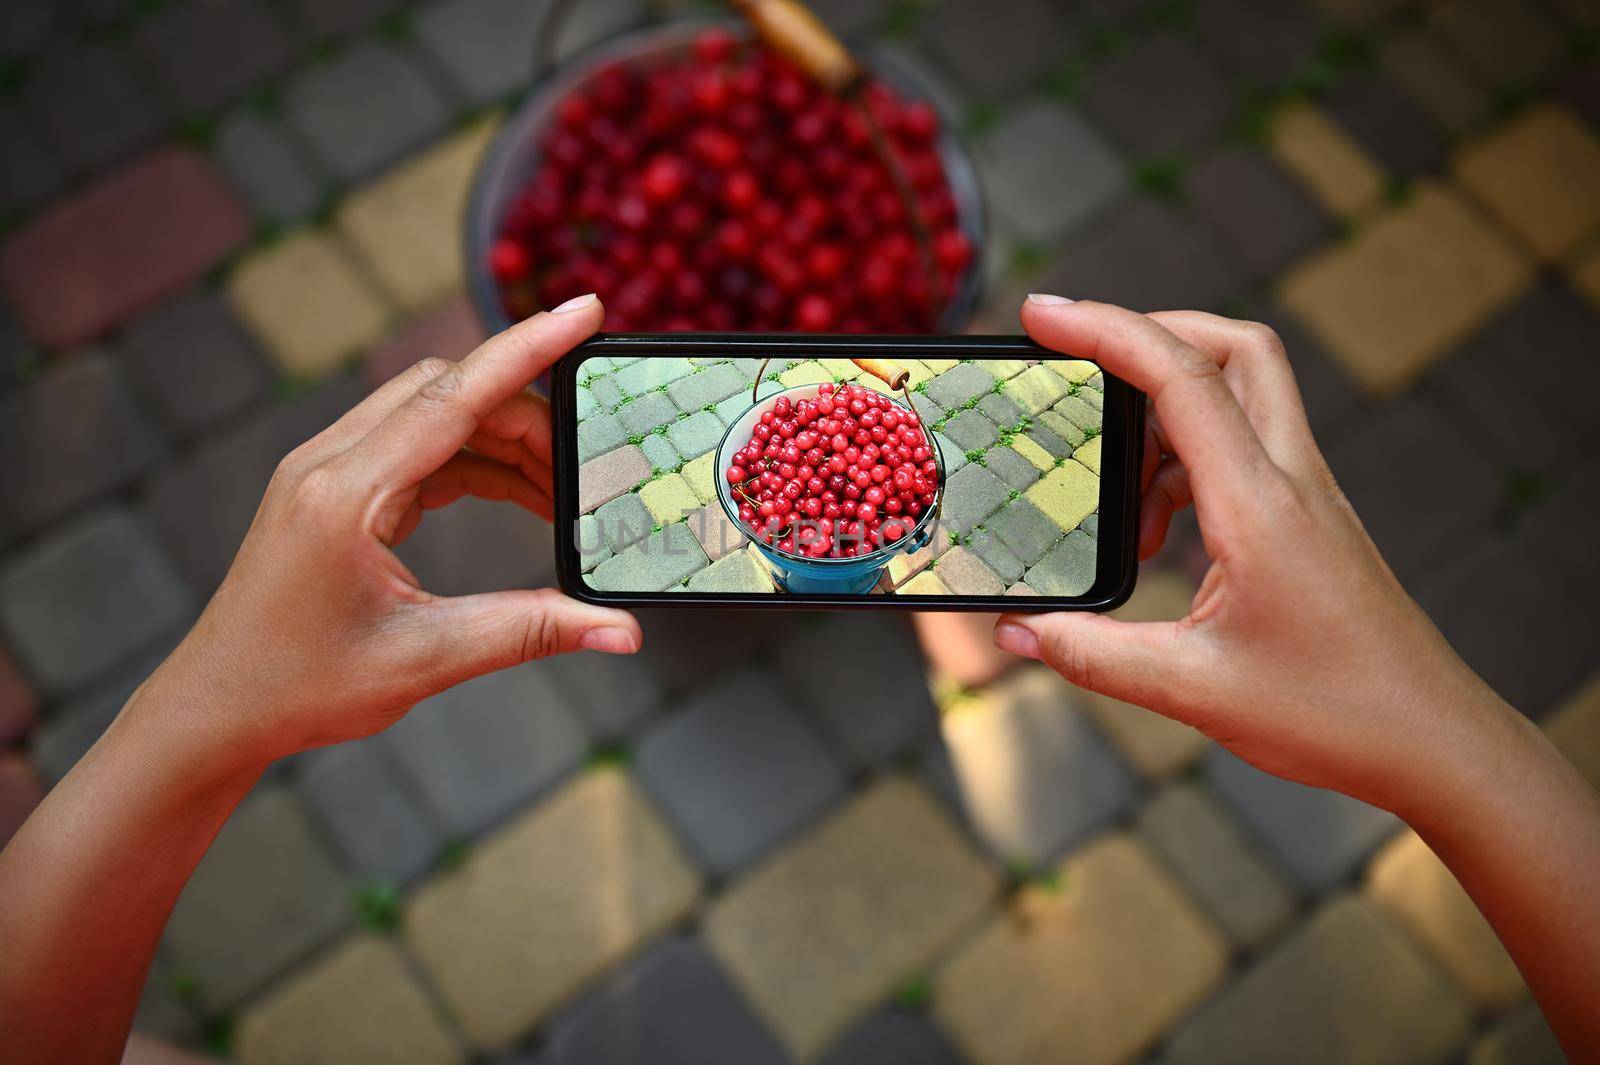 Mobile phone in live view mode. Close-up of hands holding a smartphone and taking a horizontal photography of cherry harvest in blue metal bucket by artgf